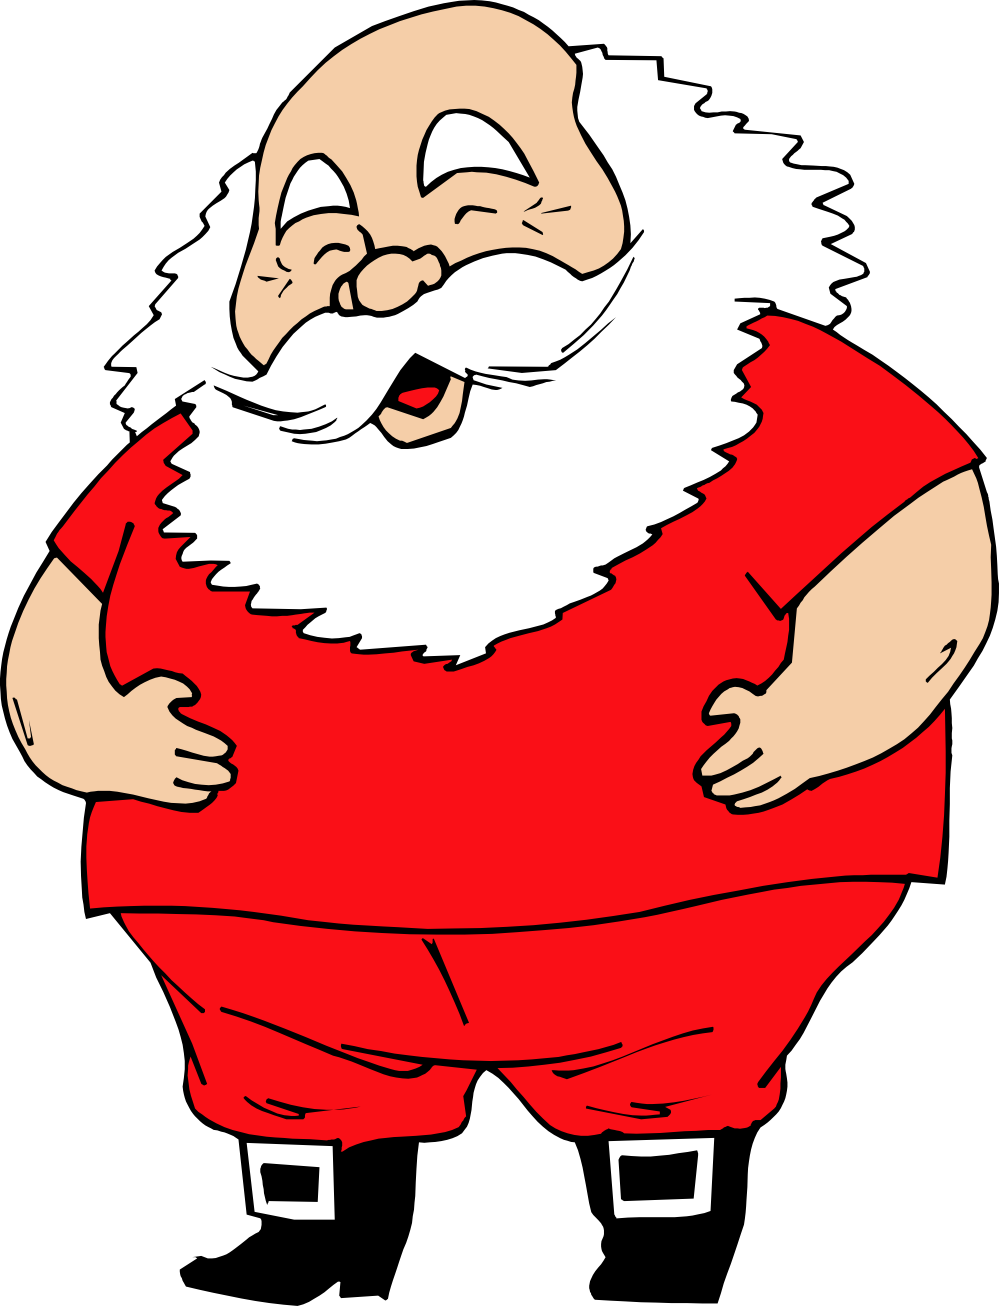 Cute Santa Claus Clipart Images & Pictures - Becuo